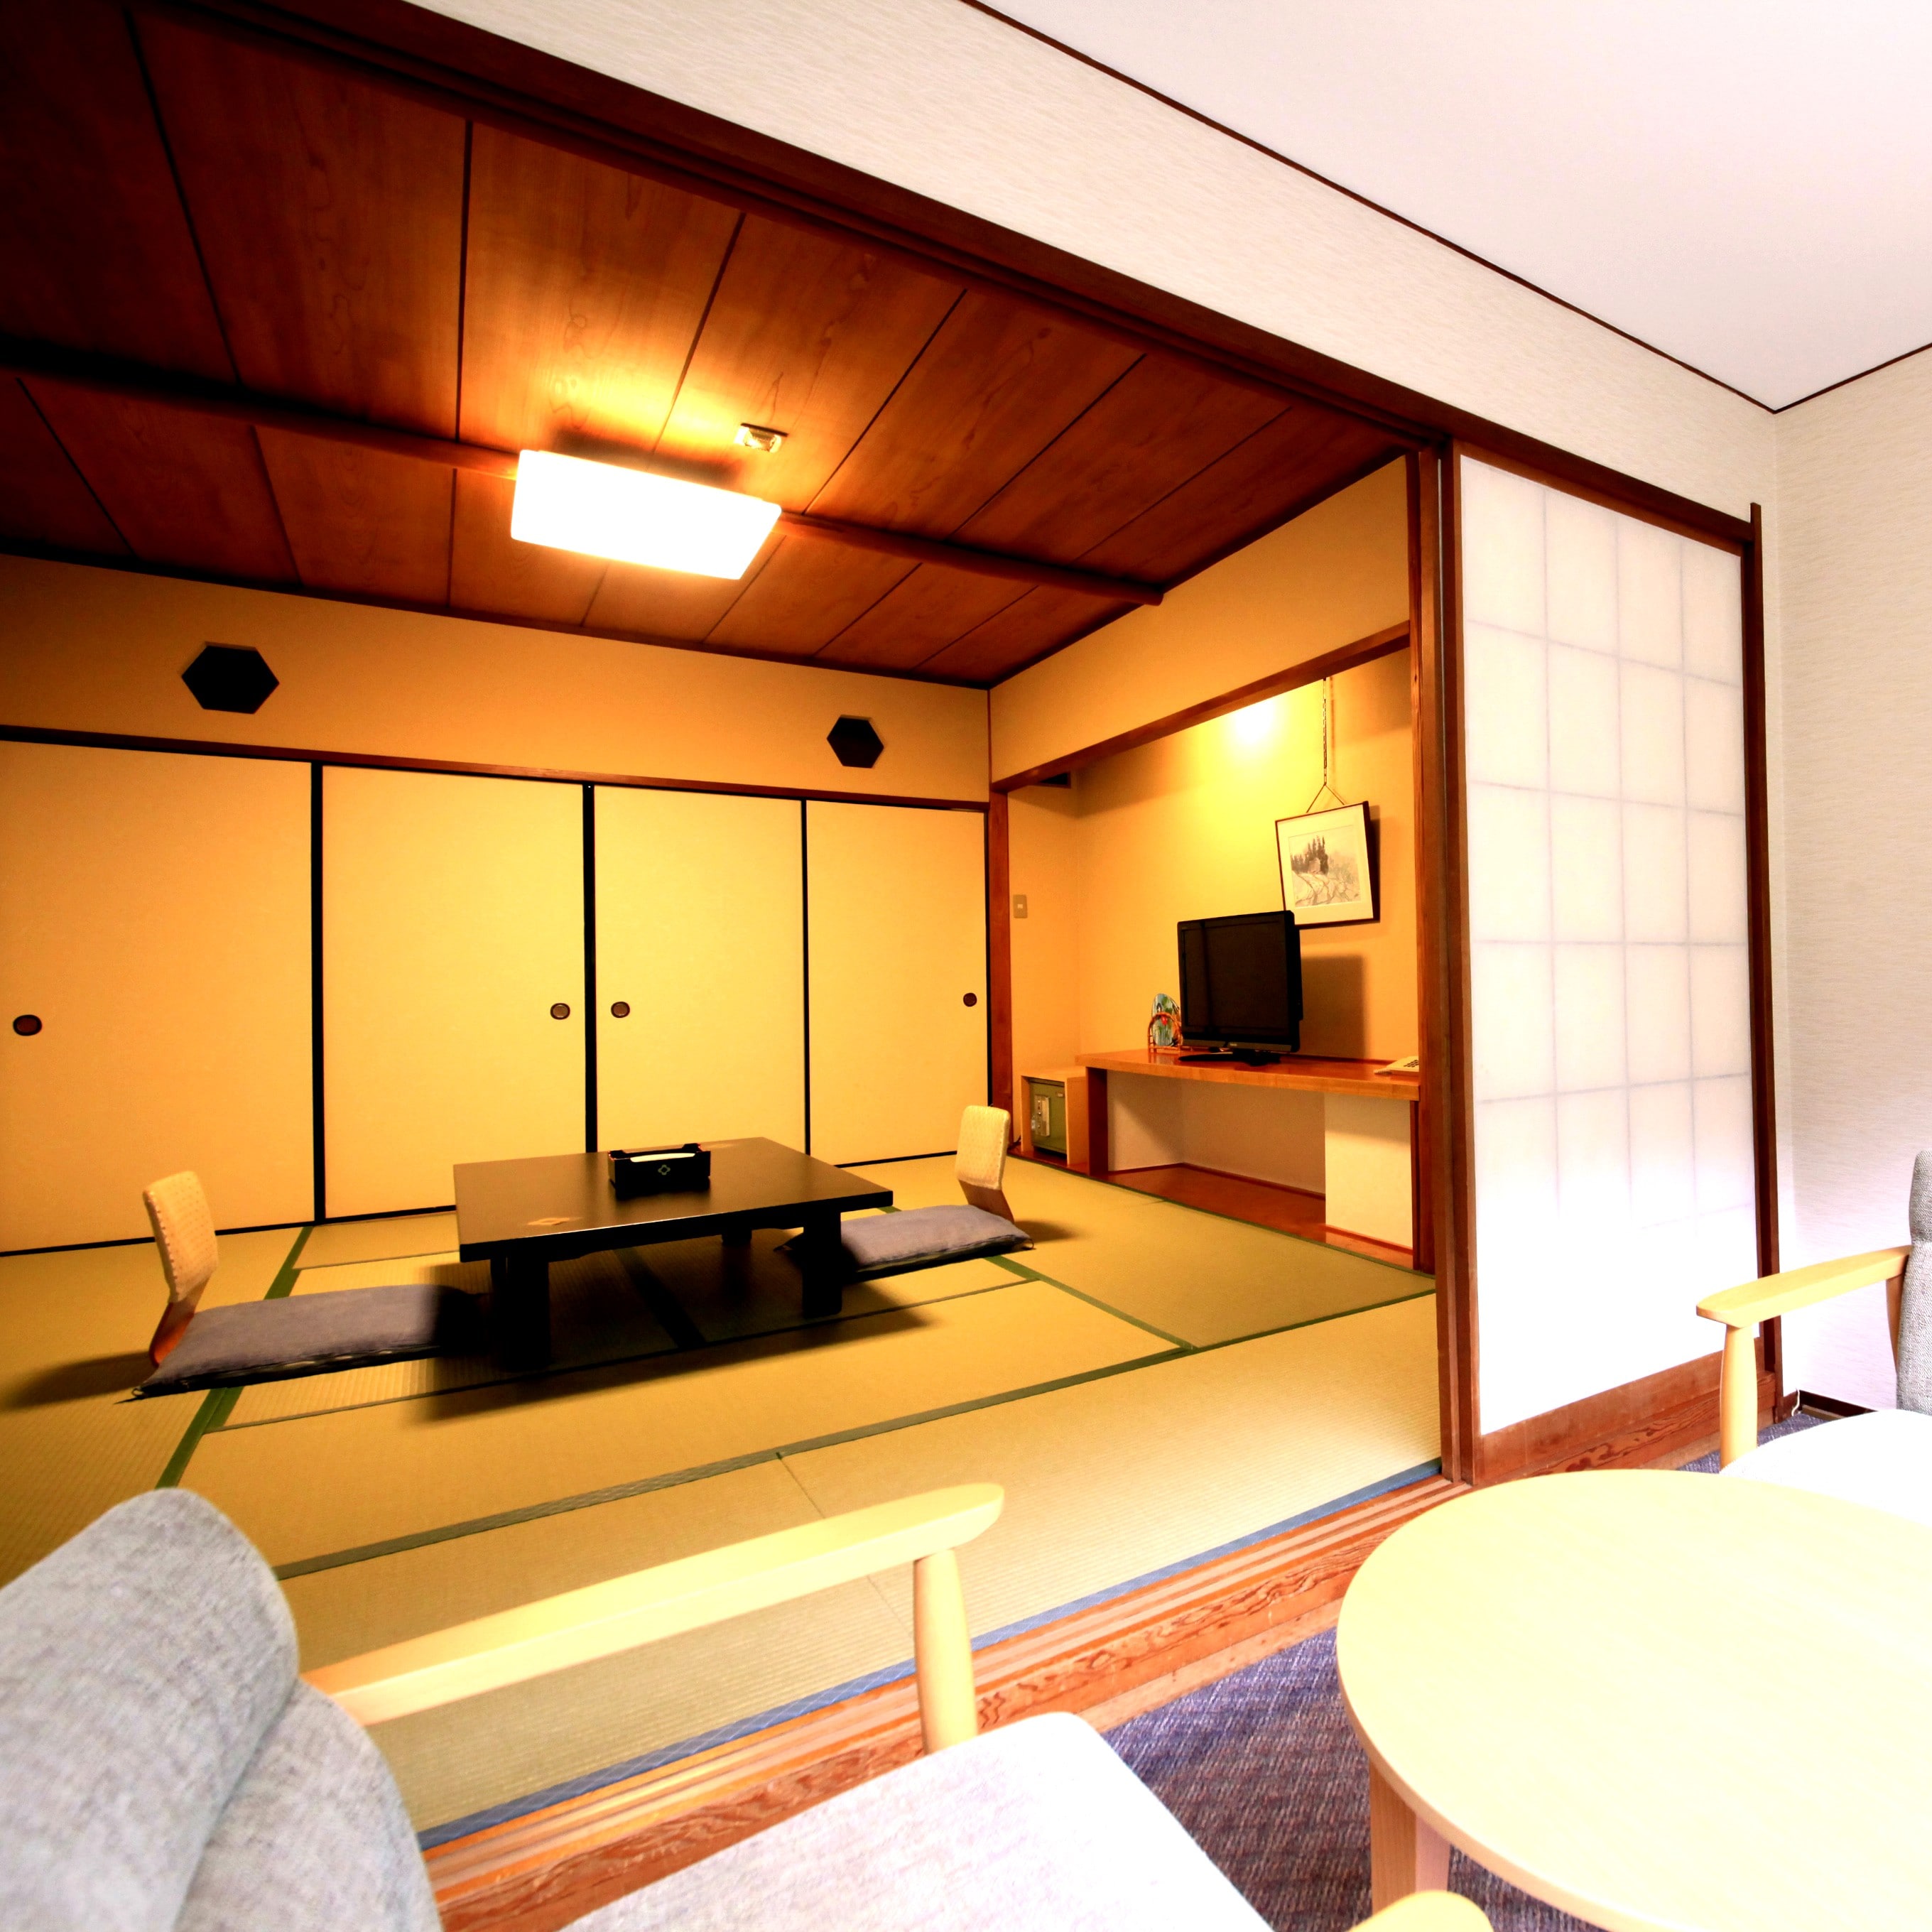 ■ Japanese-style room ③